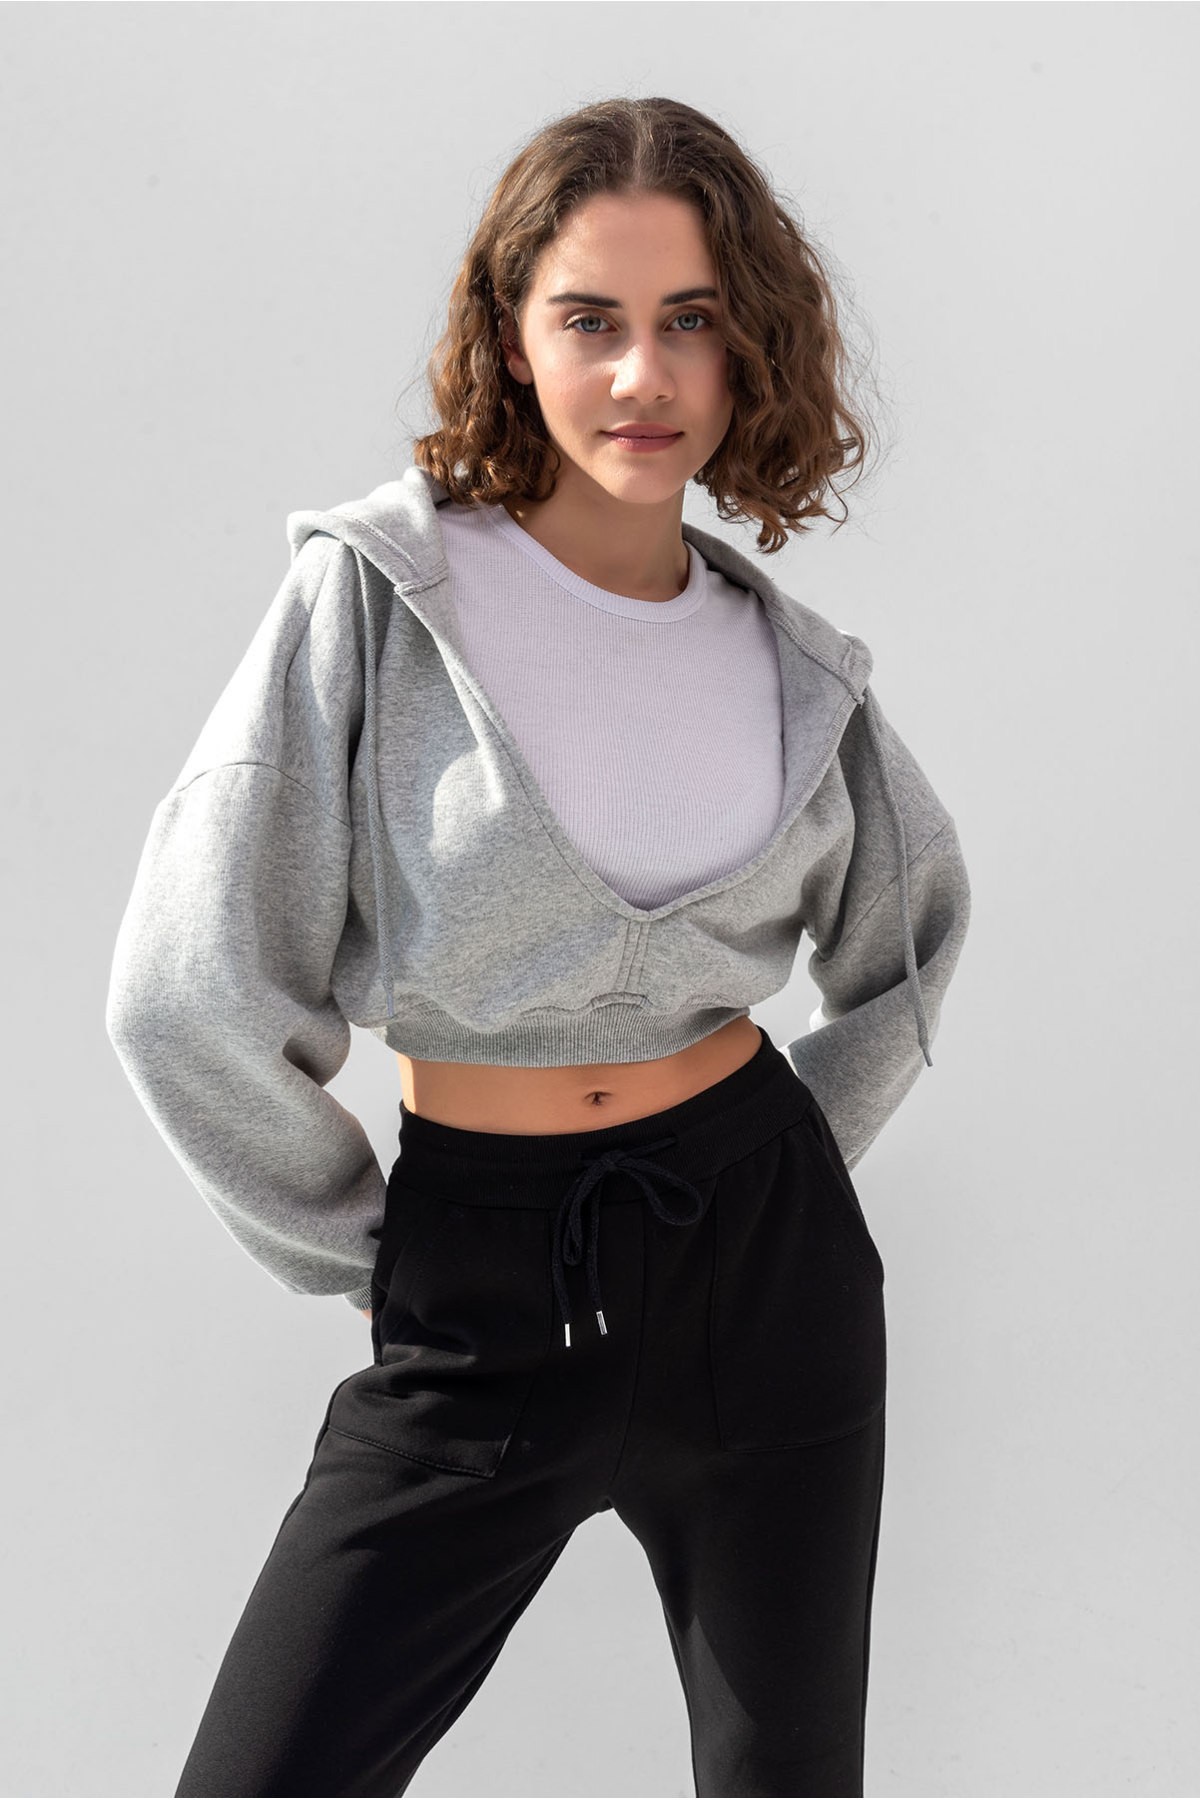 Hooded V Neck Crop Knitted Sweatshirt - Gray